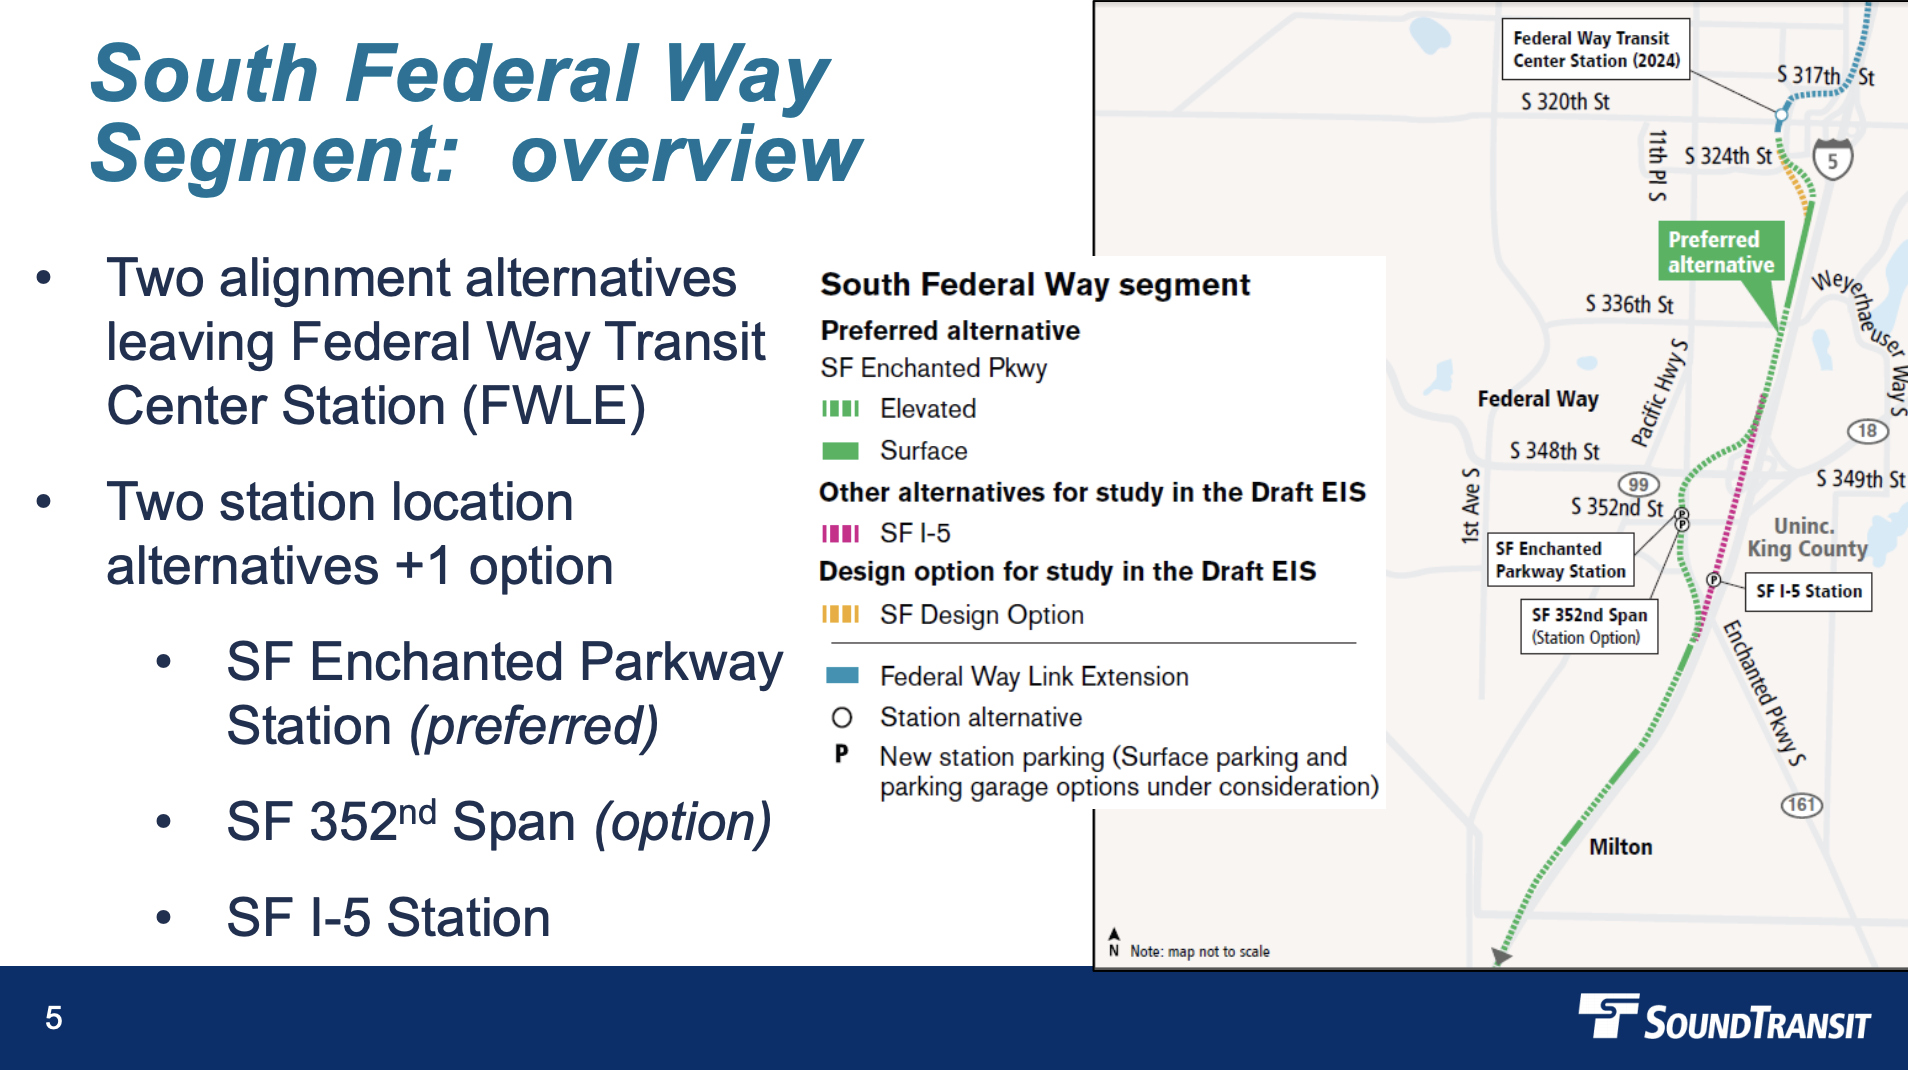 Overview of the South Federal Way segment, including station and alignment options. (Sound Transit)